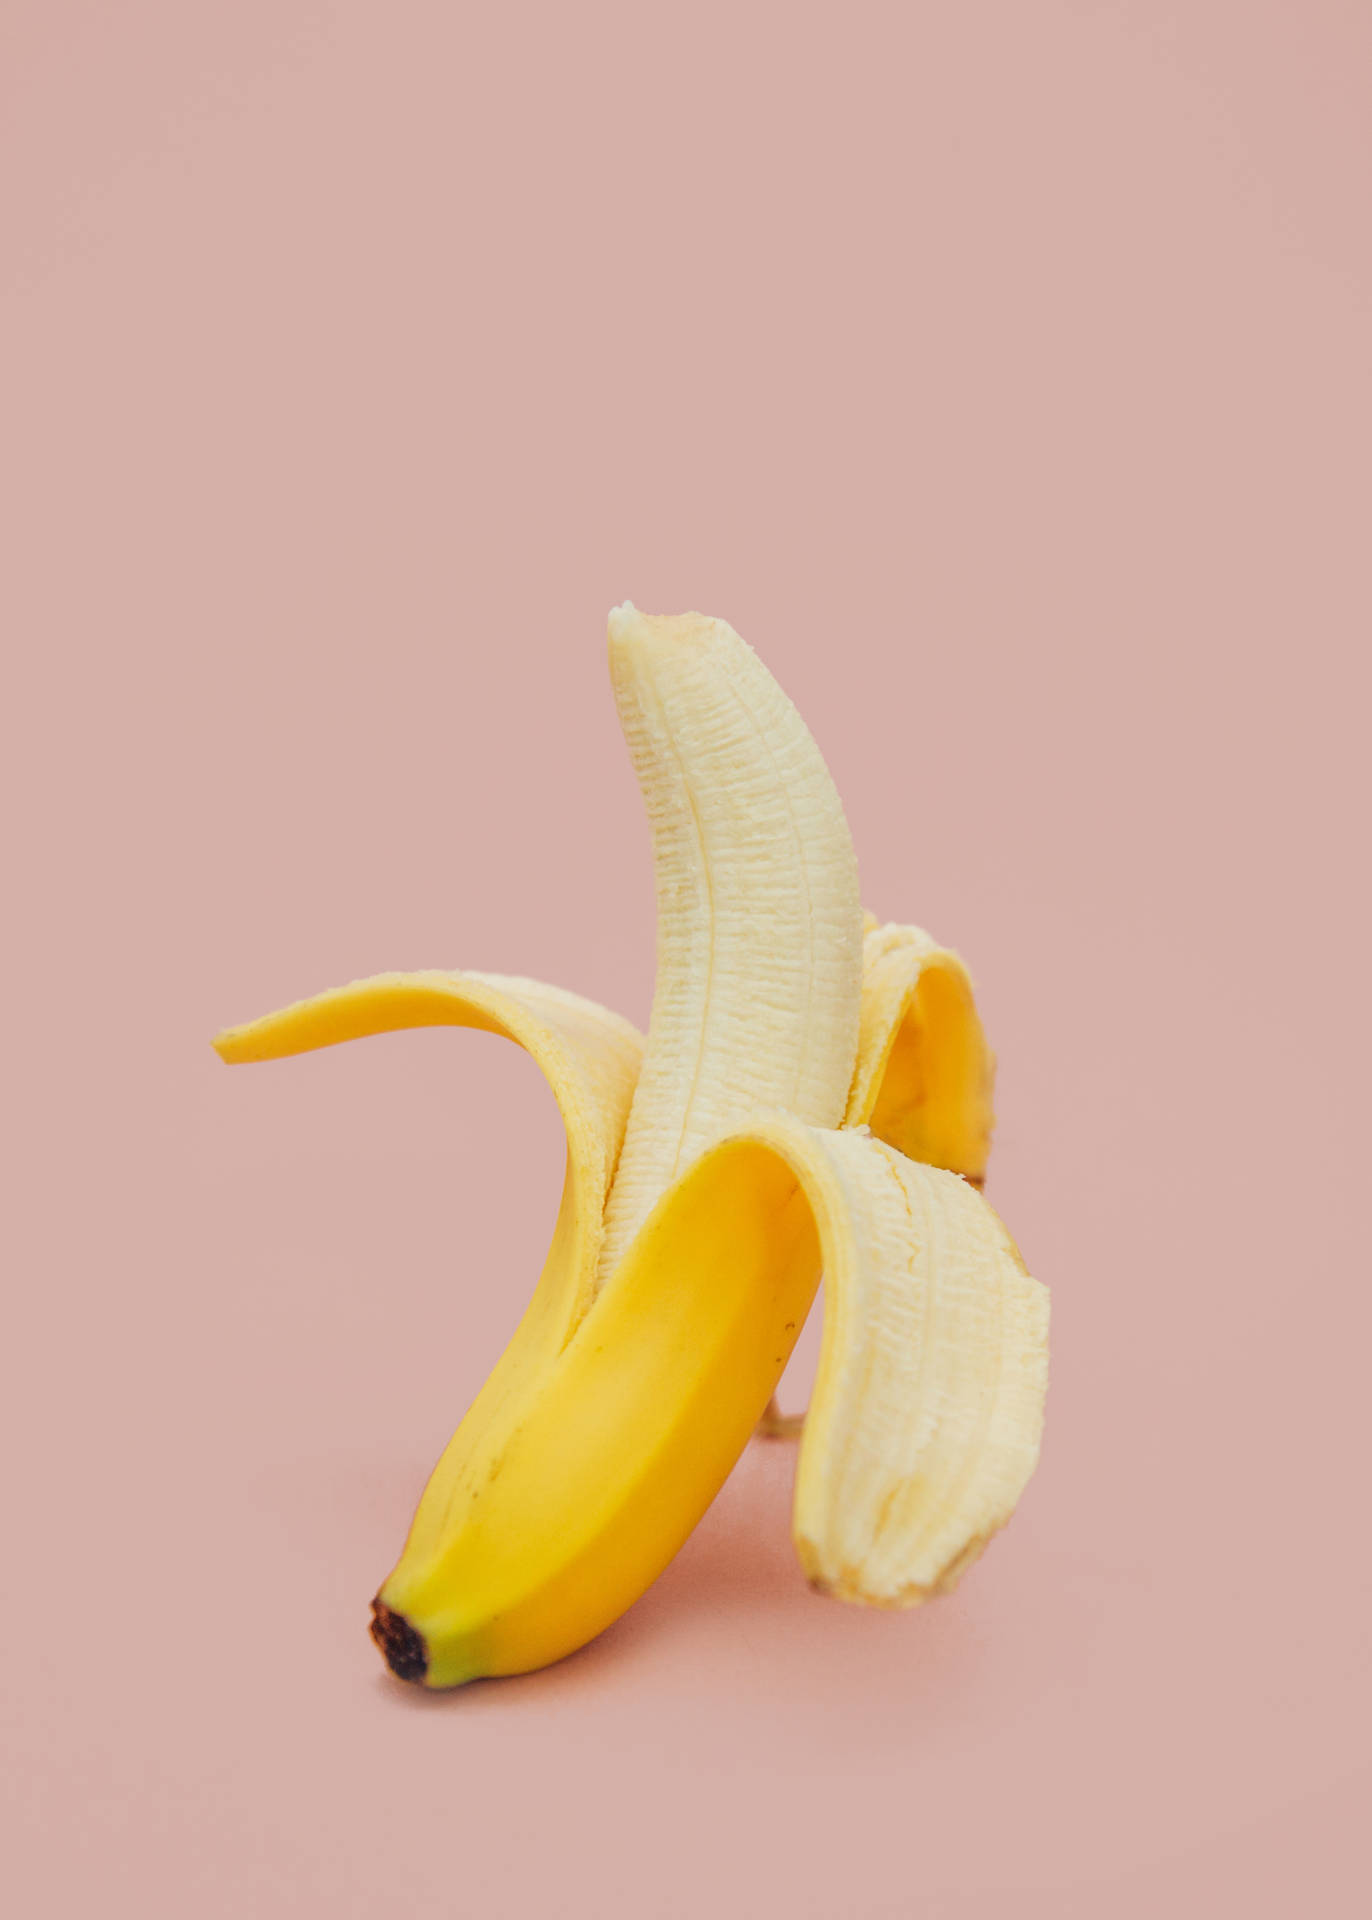 2791X3907 Fruit Wallpaper and Background